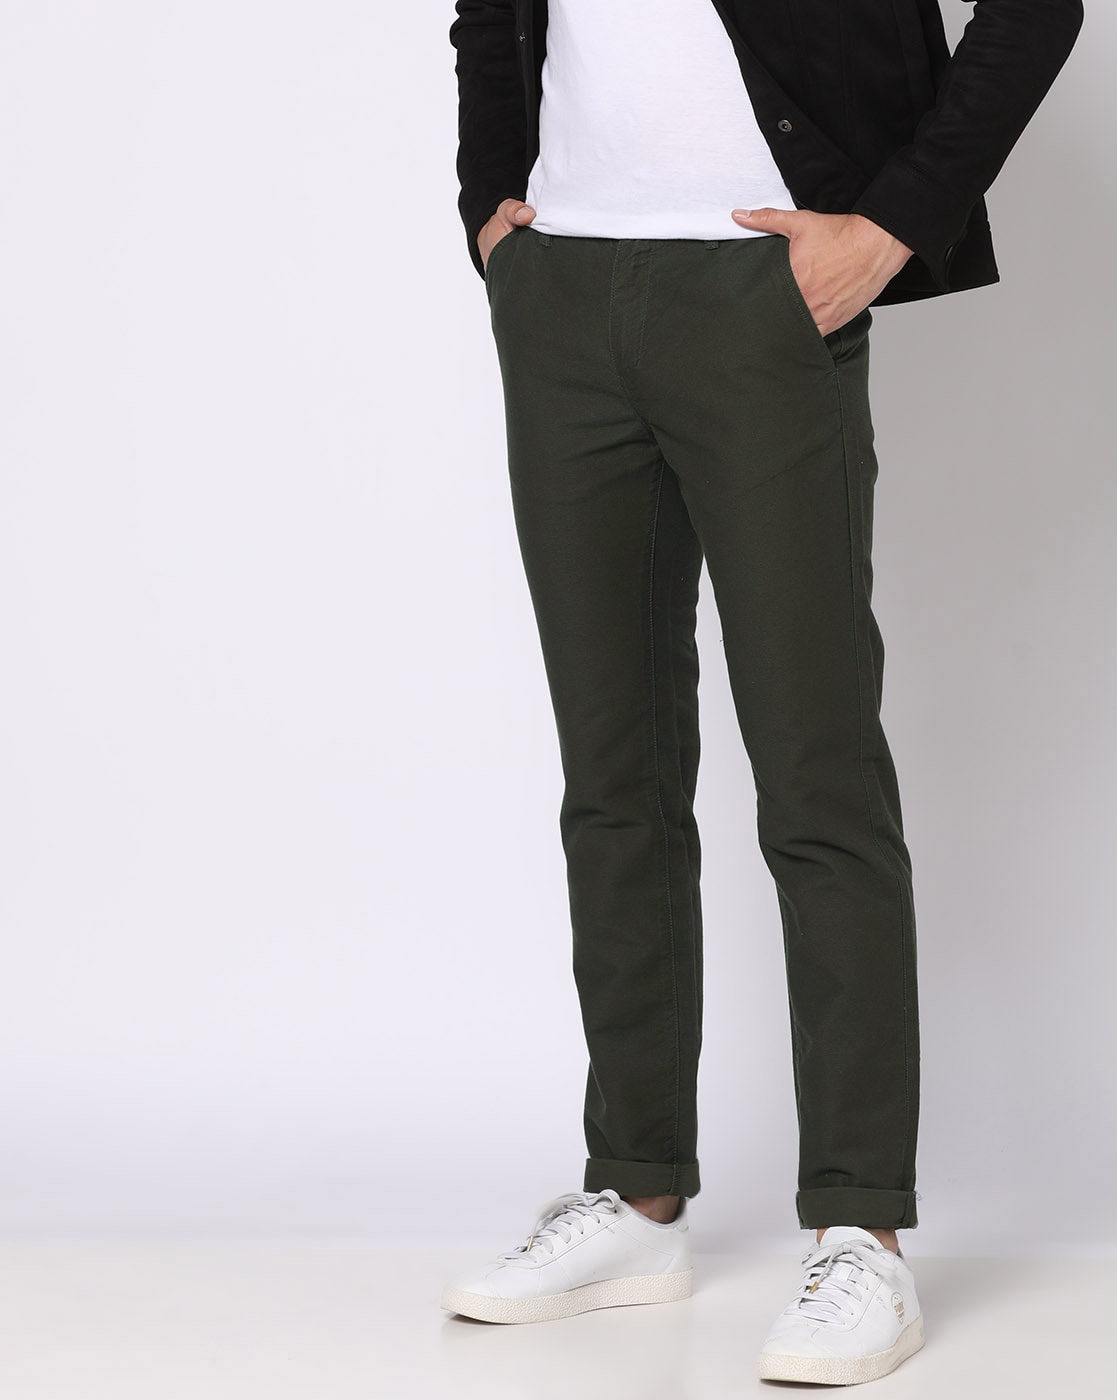 Men's Black Crew-neck T-shirt, Olive Chinos, Black Canvas High Top  Sneakers, Black Leather Belt | Lookastic